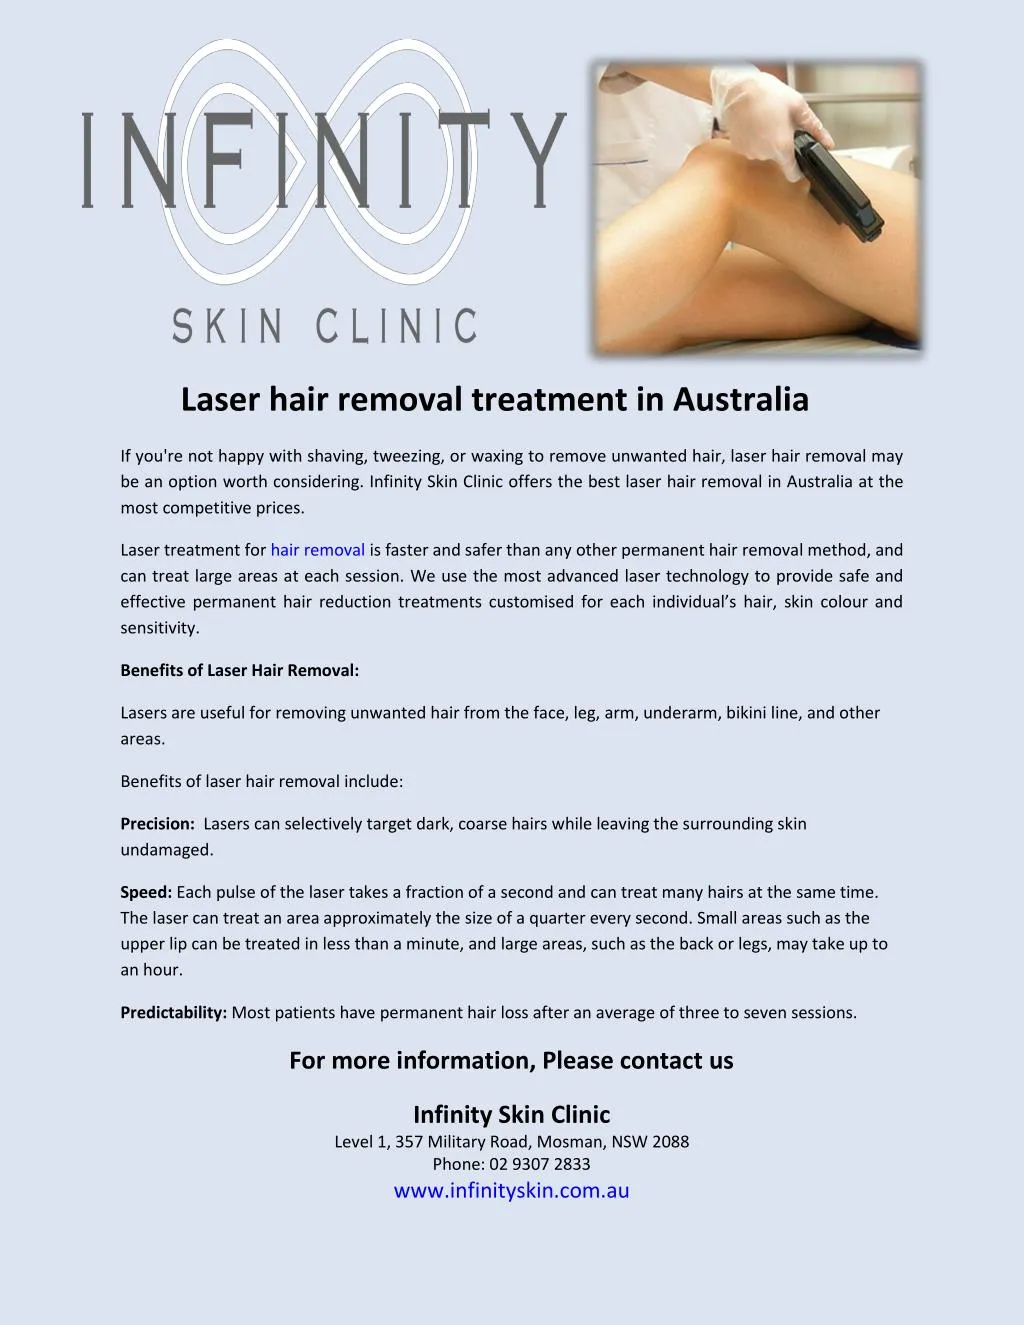 Ppt Laser Hair Removal Treatment In Australia Powerpoint Presentation Id7218279 